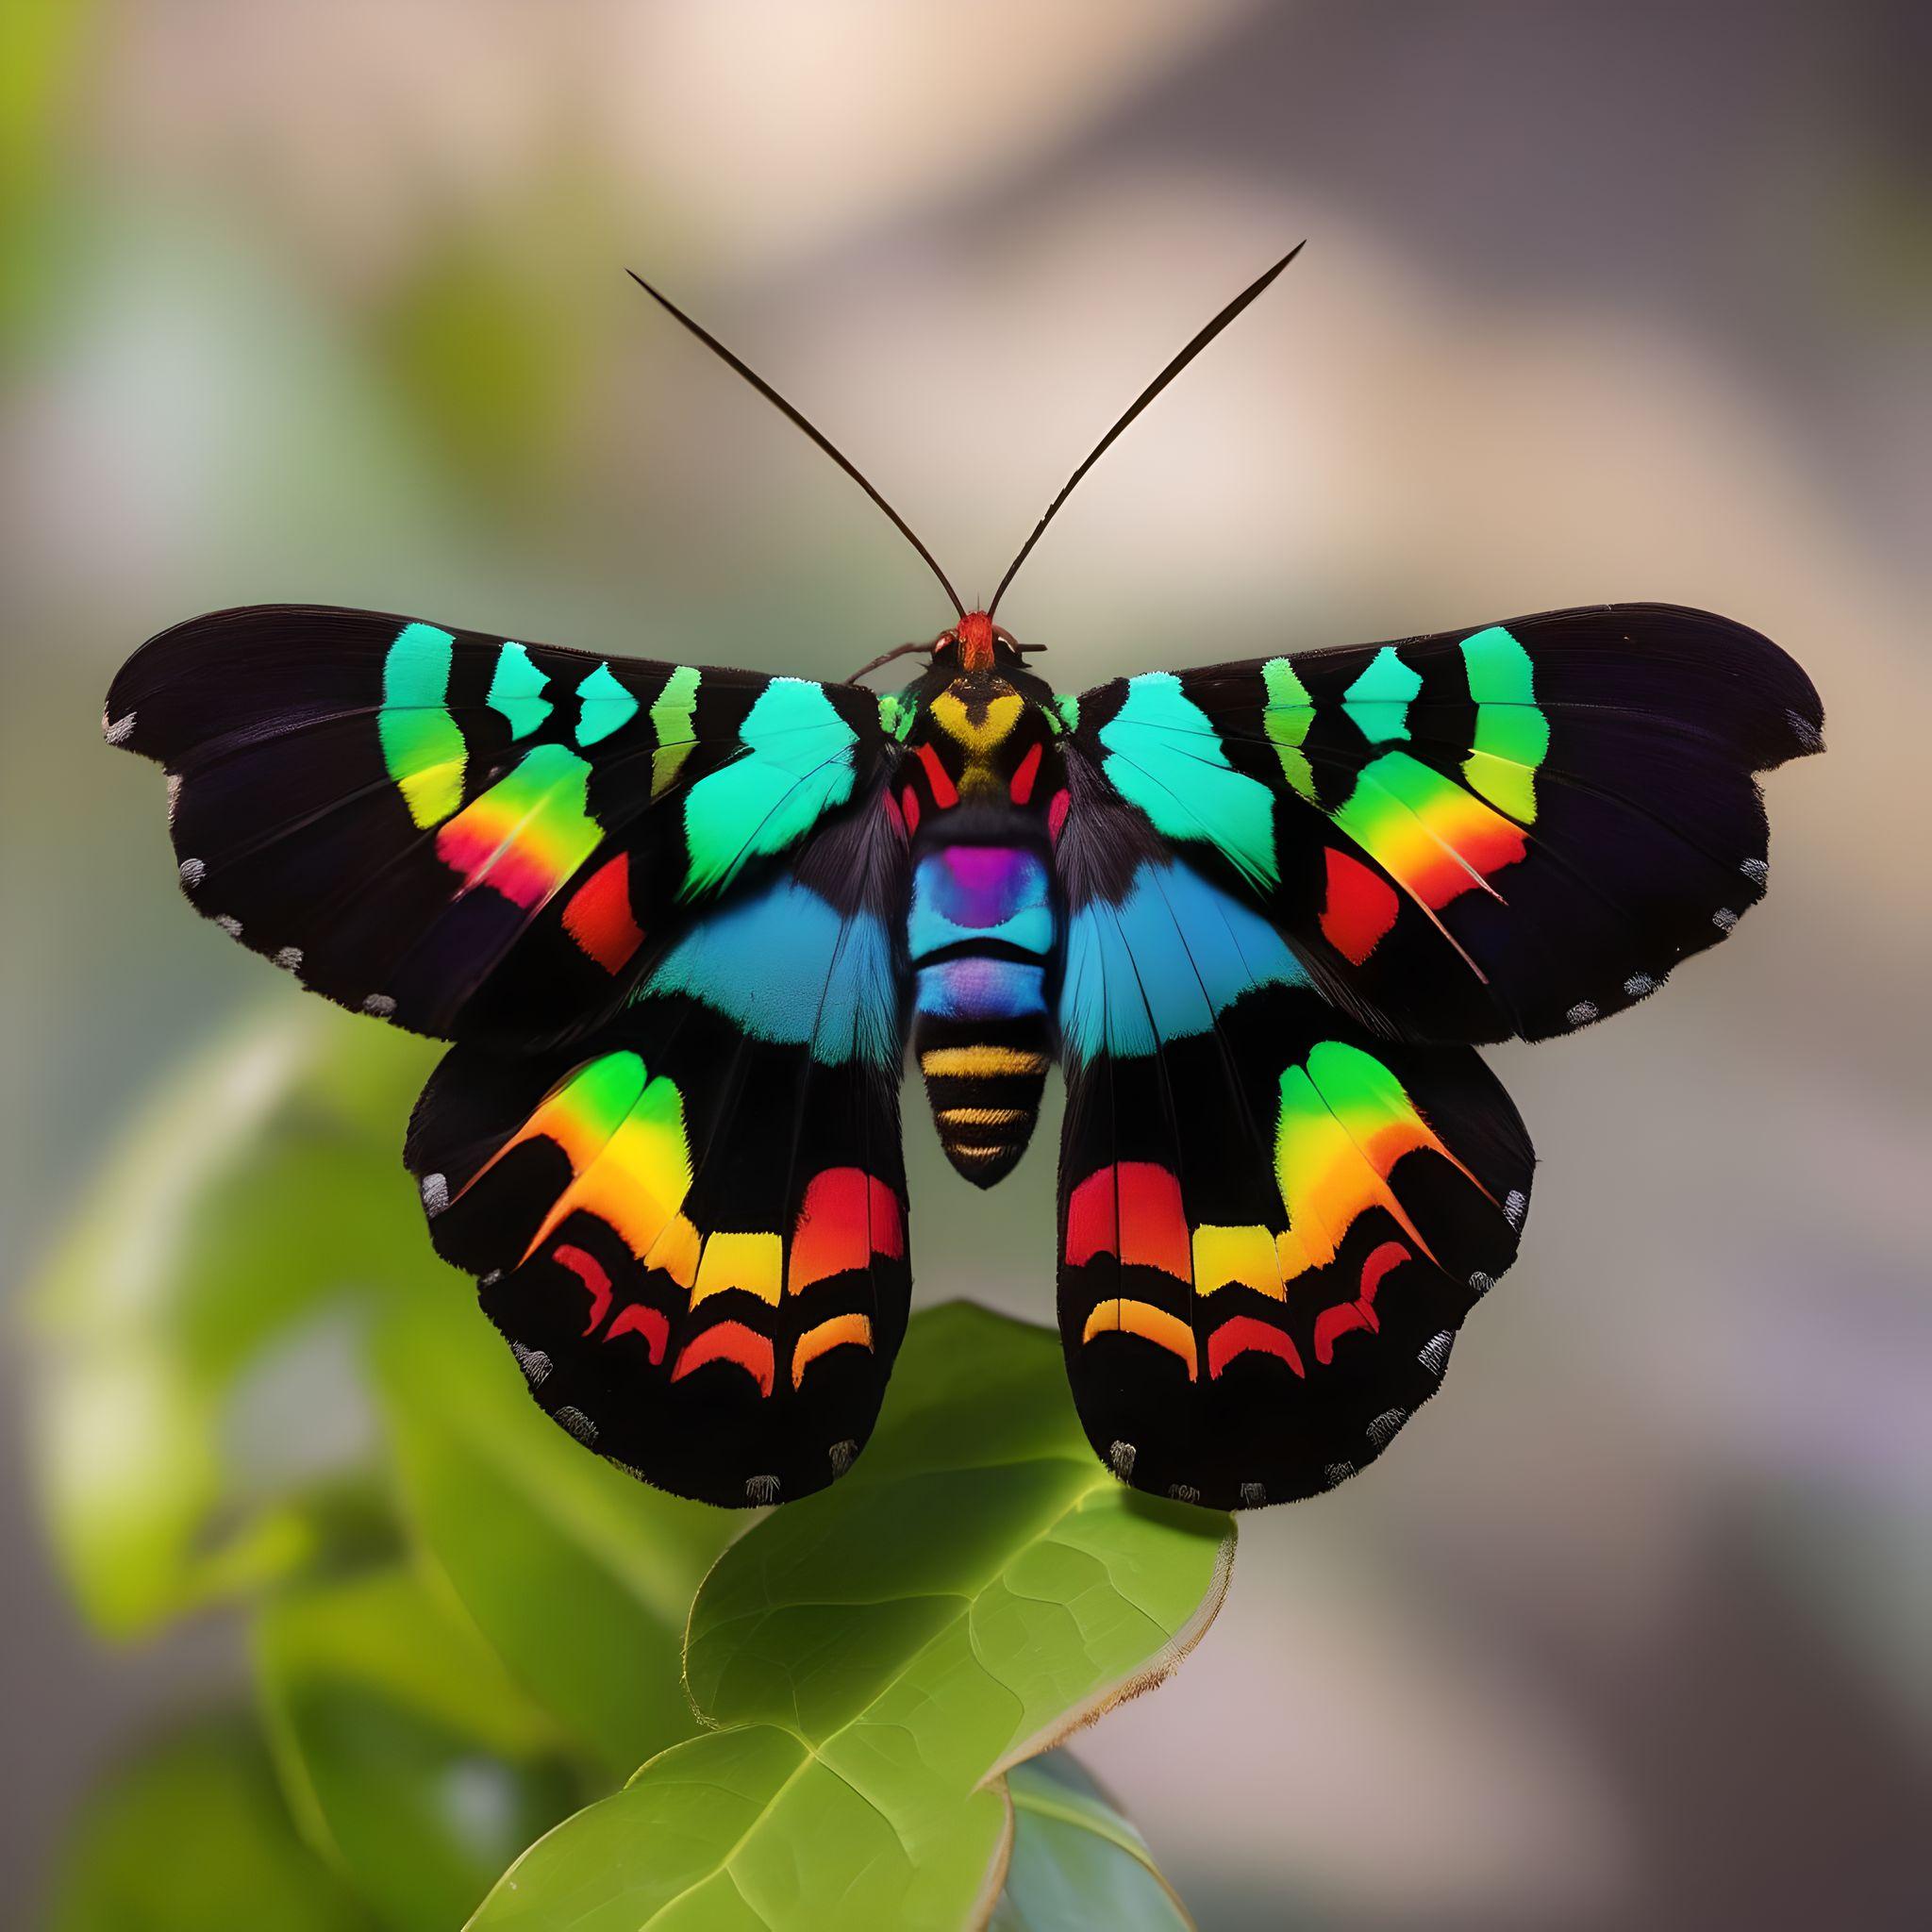 The Madagascan Sunset Moth is a dazzling marvel of nature